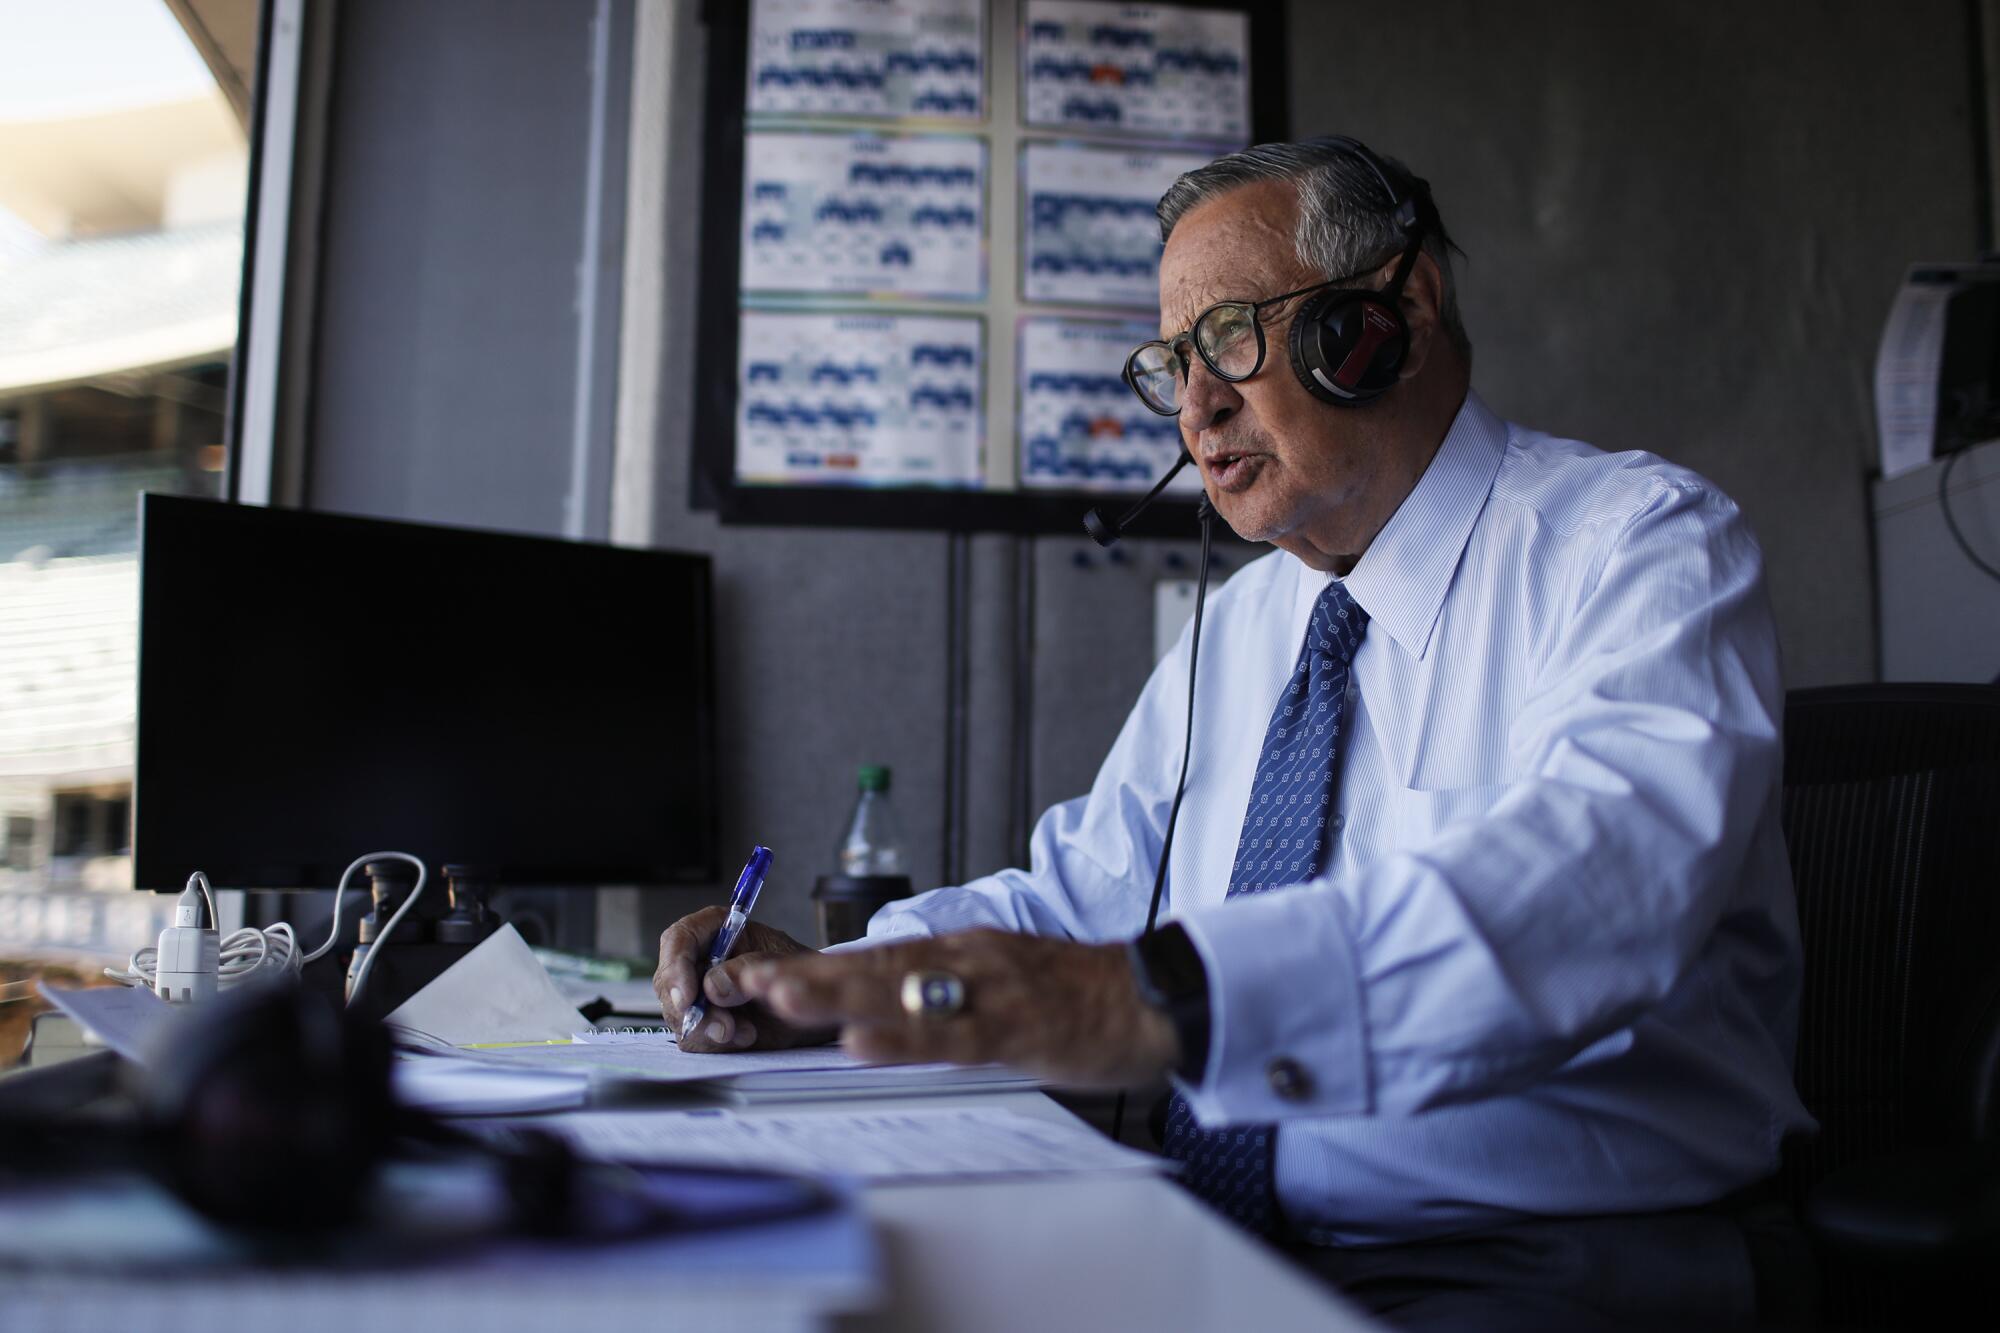 An Unlikely Gift from Dodger Broadcaster Jorge Jarrin